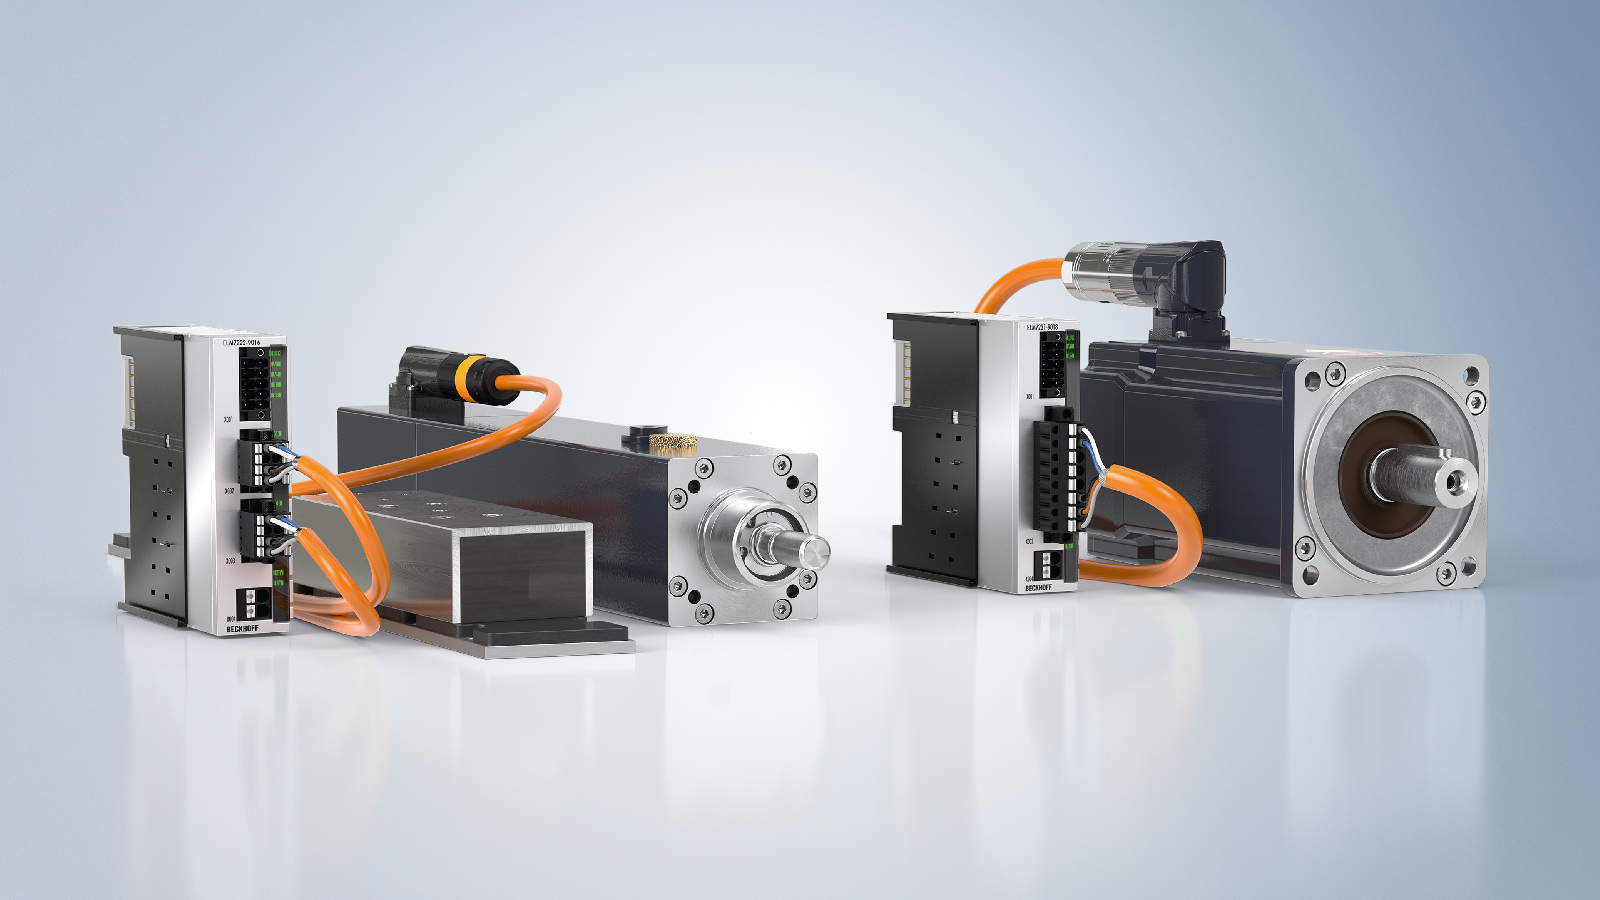 Compact drive technology from Beckhoff has been combining the advantages of EtherCAT, terminal technology and servo technology for ten years now and remains highly innovative. This is demonstrated by the recently expanded ELM servomotor terminal range for rotary and linear actuators and electric cylinders.